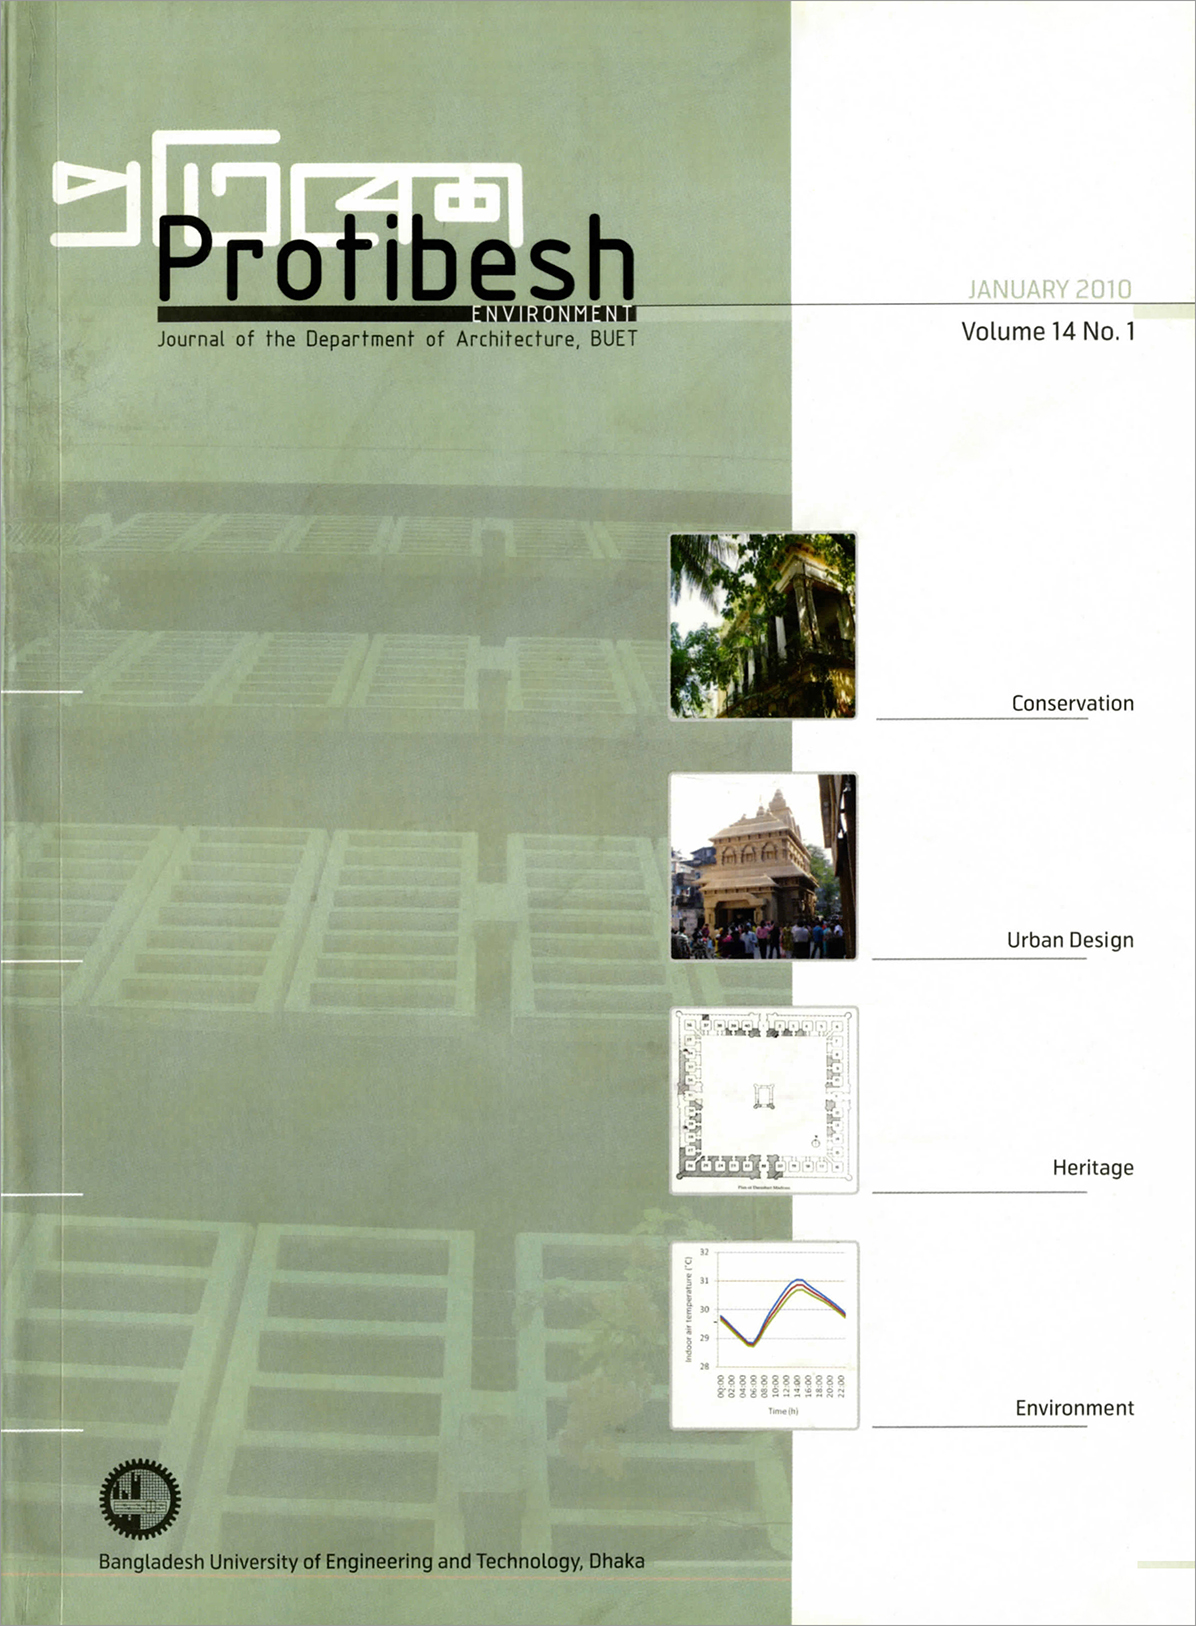 Cover image of Protibesh Vol-14 No-01 January-2010 - Journal of the Department of Architecture, BUET